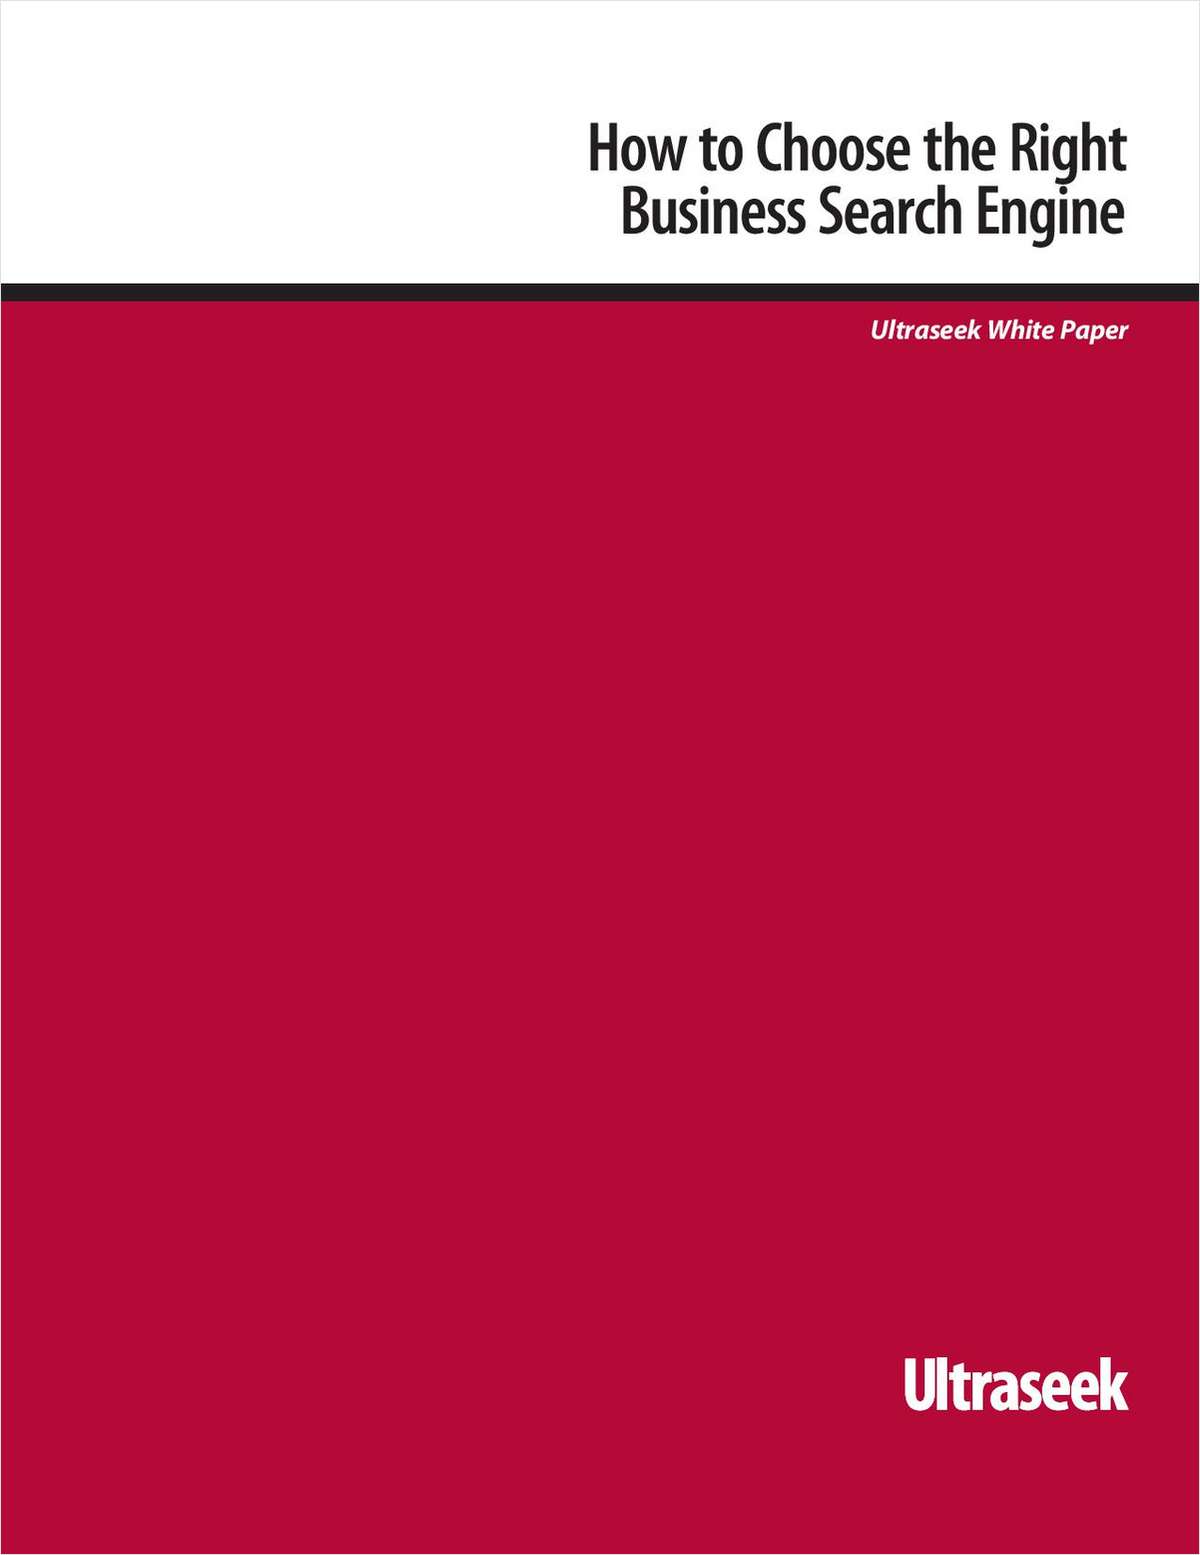 How to Choose the Right Search Engine for Your Business